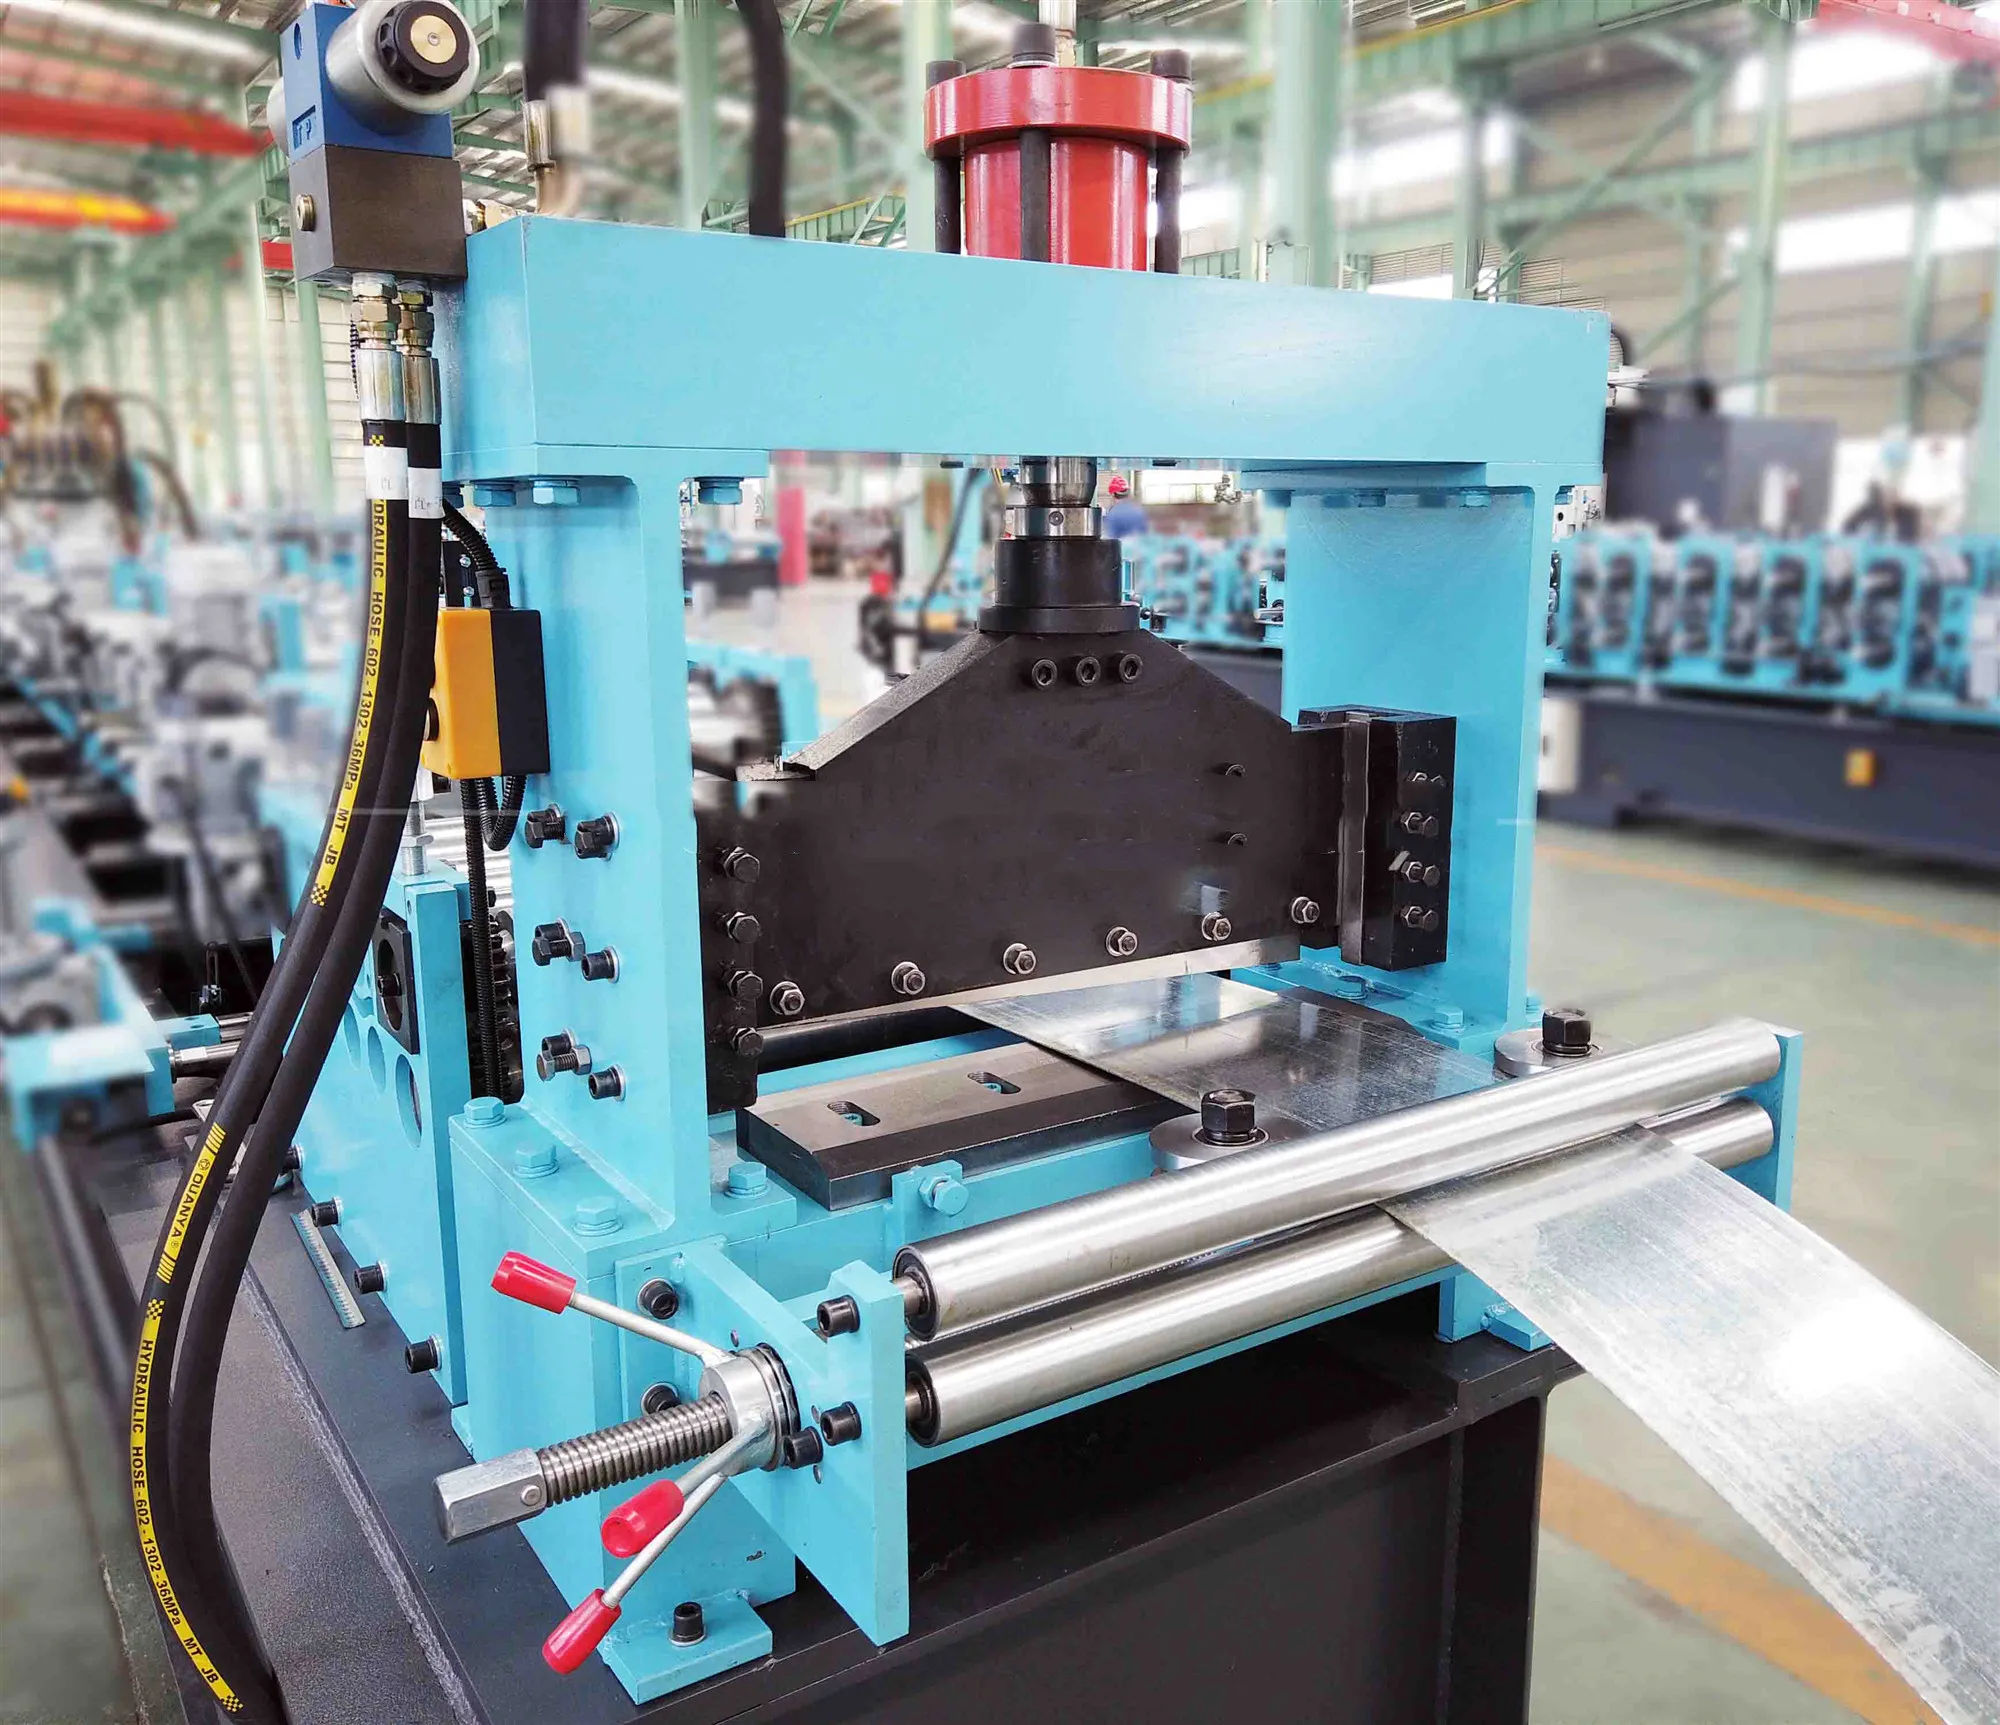 High speed automatic operate CZ interchangeable purlin production machine